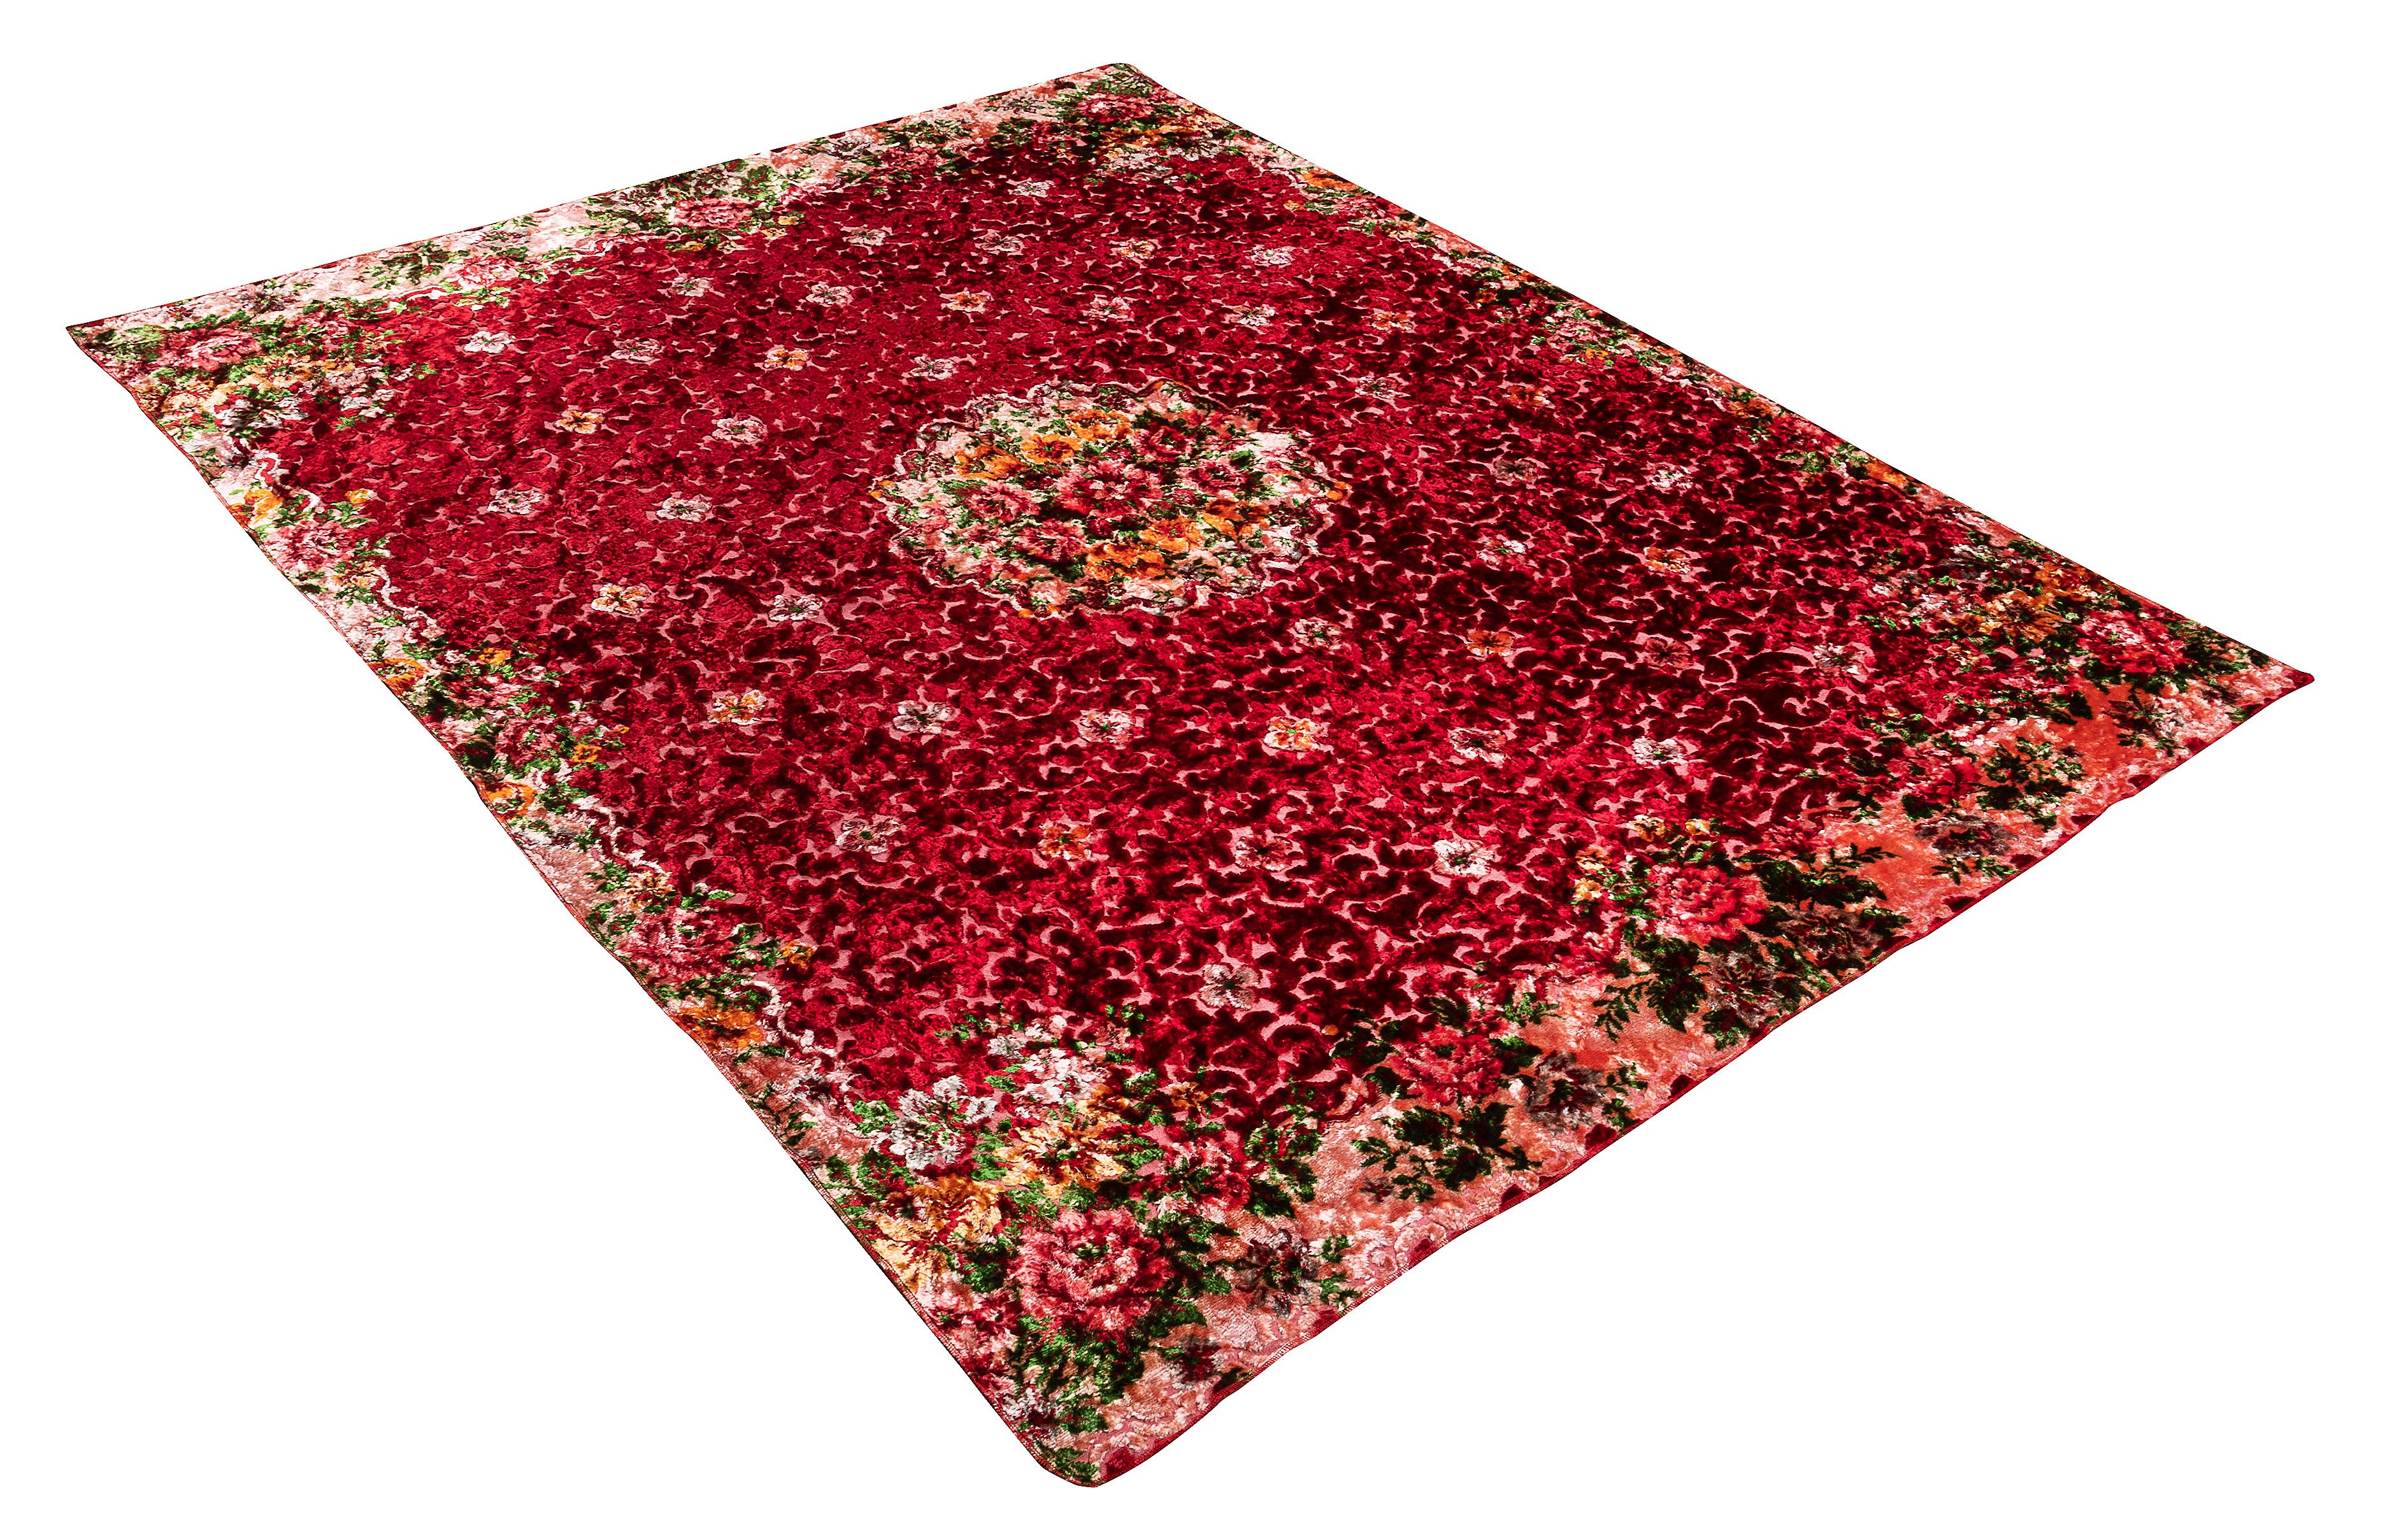 Bohemian 5.7x7 Ft One of a Kind Vintage Floral Design Velvet Wall Hanging, Red Bed Cover For Sale